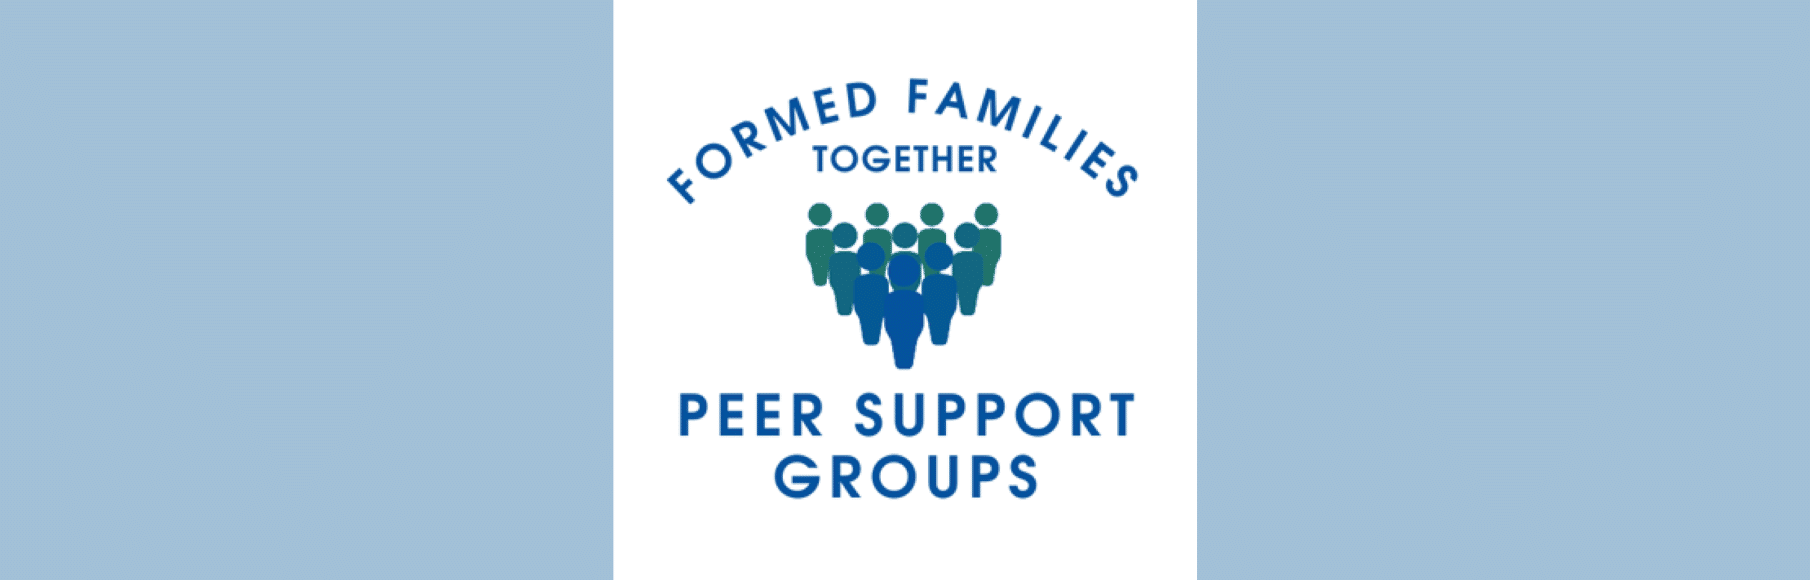 FFT Support Groups Hero Image